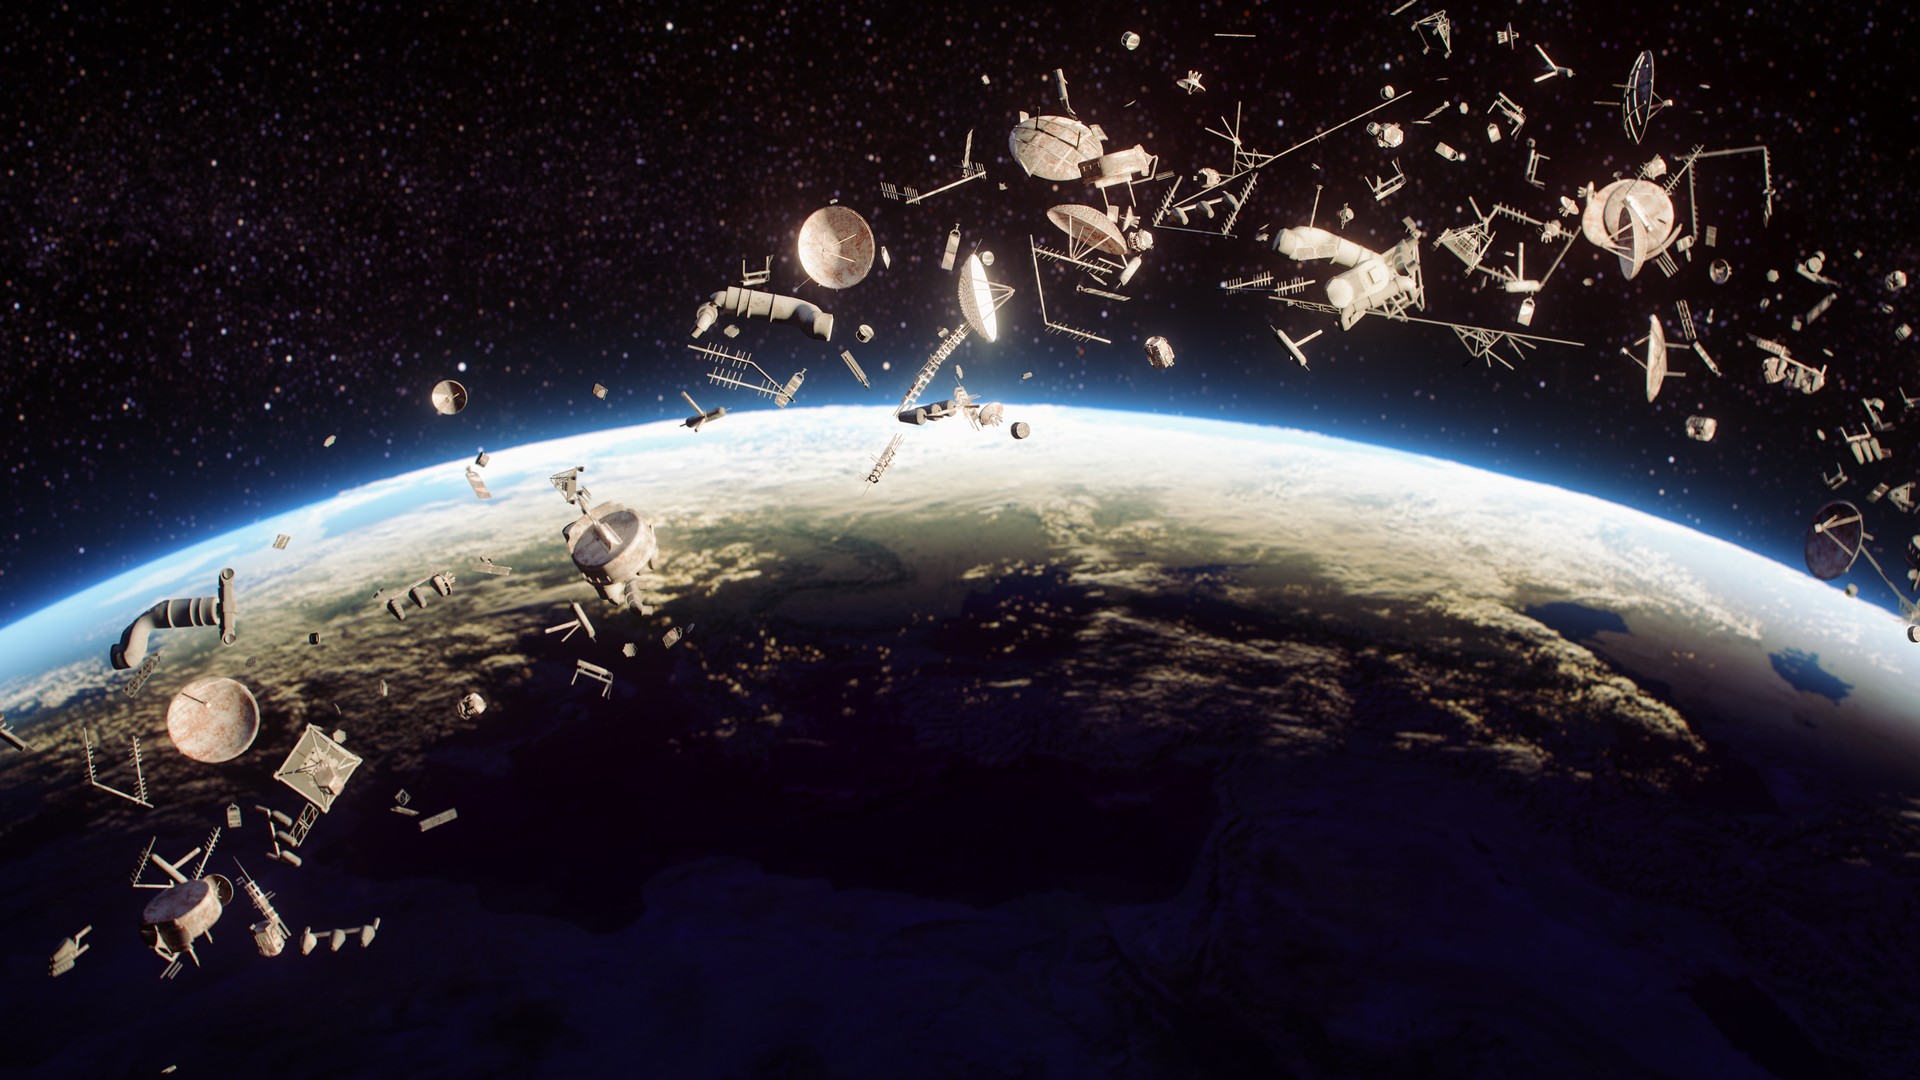 Taking out the trash: Here’s how private companies could be vital for space debris removal